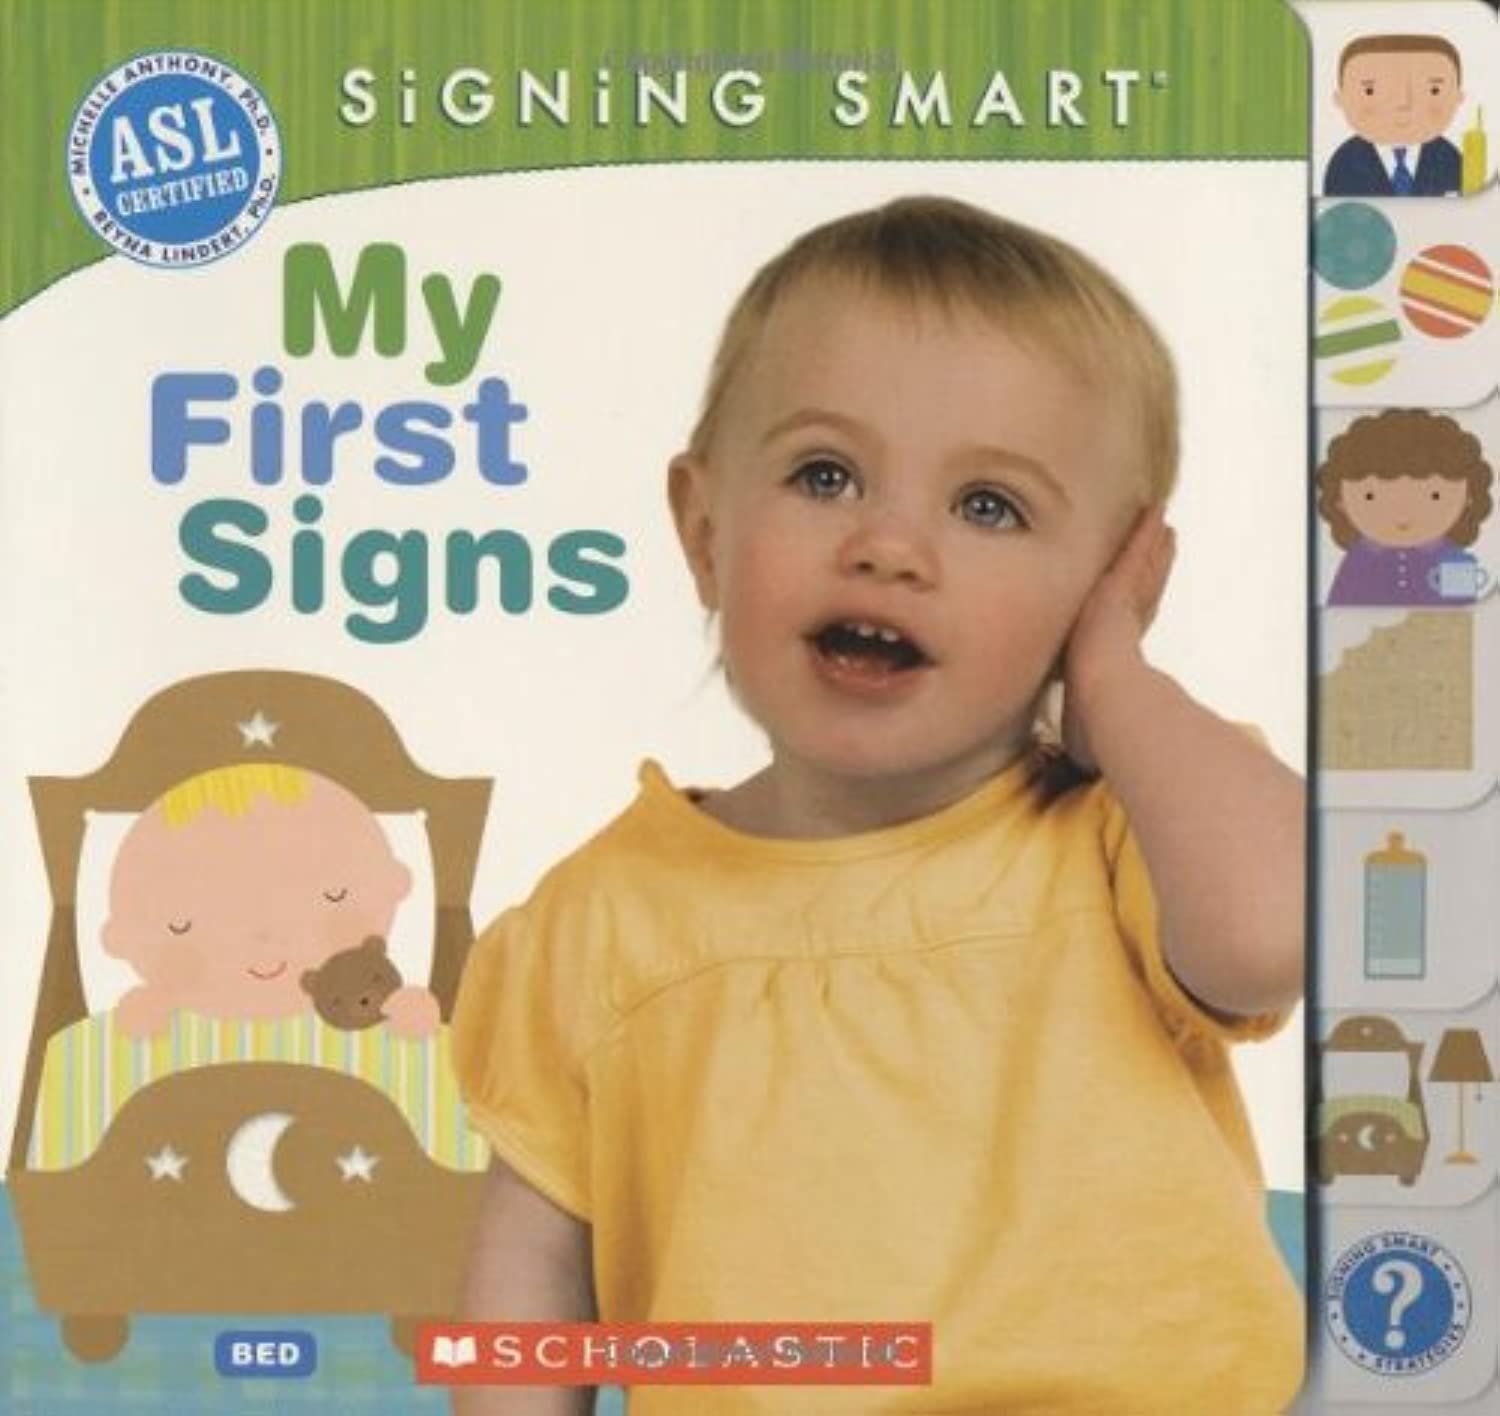 The cover of the book "My First Signs" features the title above an illustrated baby sleeping in a crib. On the right, a toddler wearing a yellow shirt holds their hand to their ear showing the sign for bed.